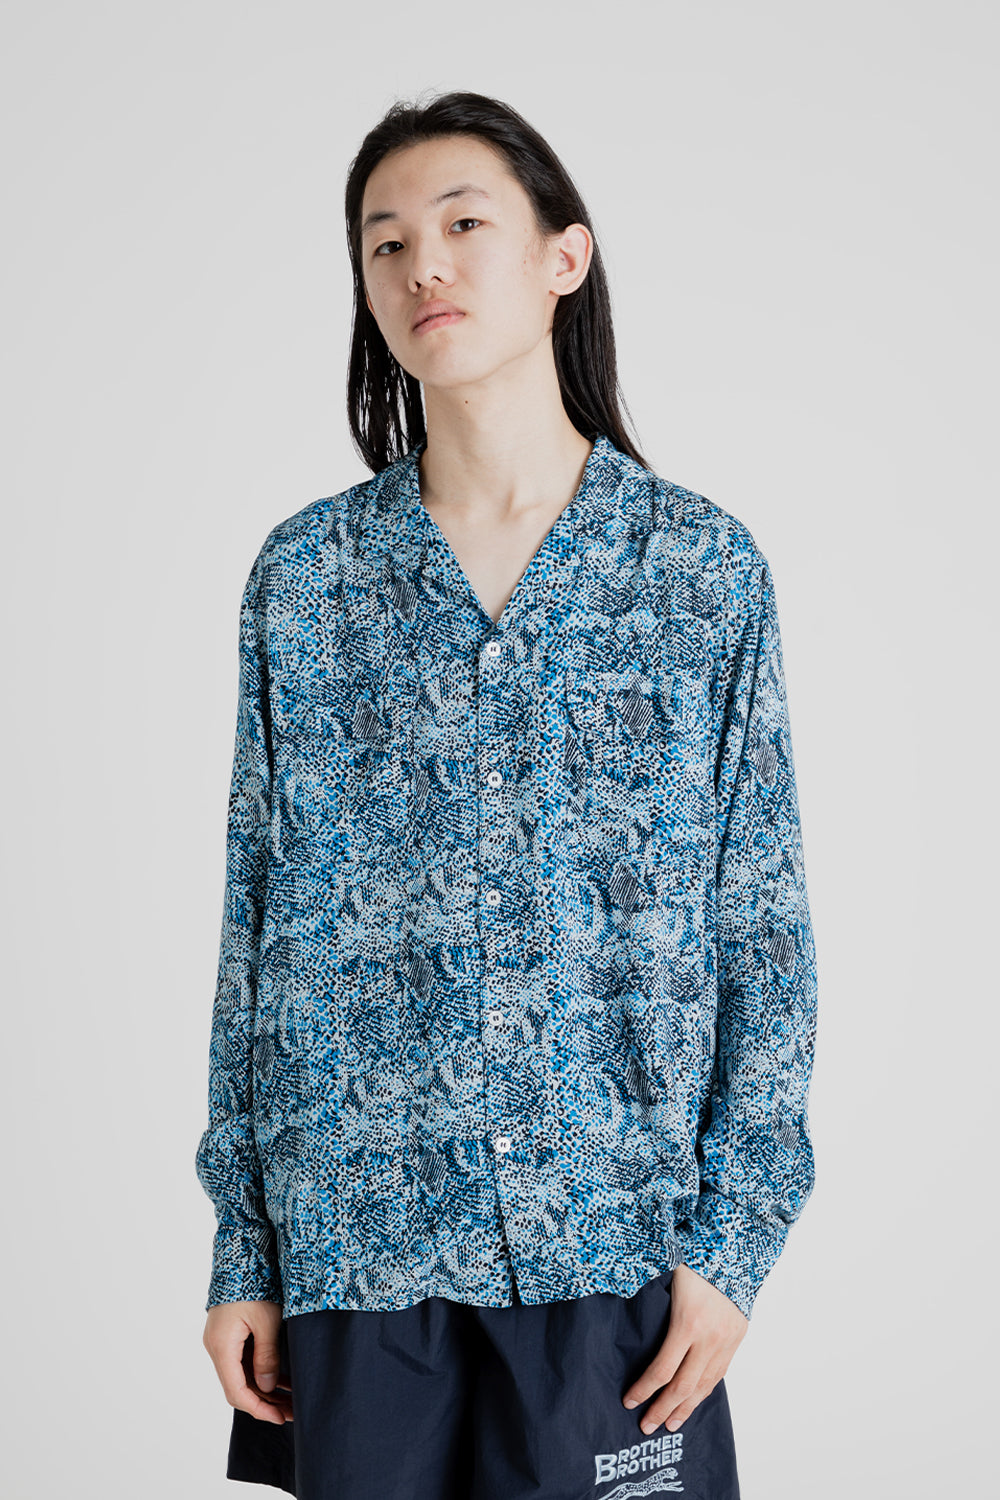 Brother Brother Products LS Rayon Shirt in Blue Snakeskin